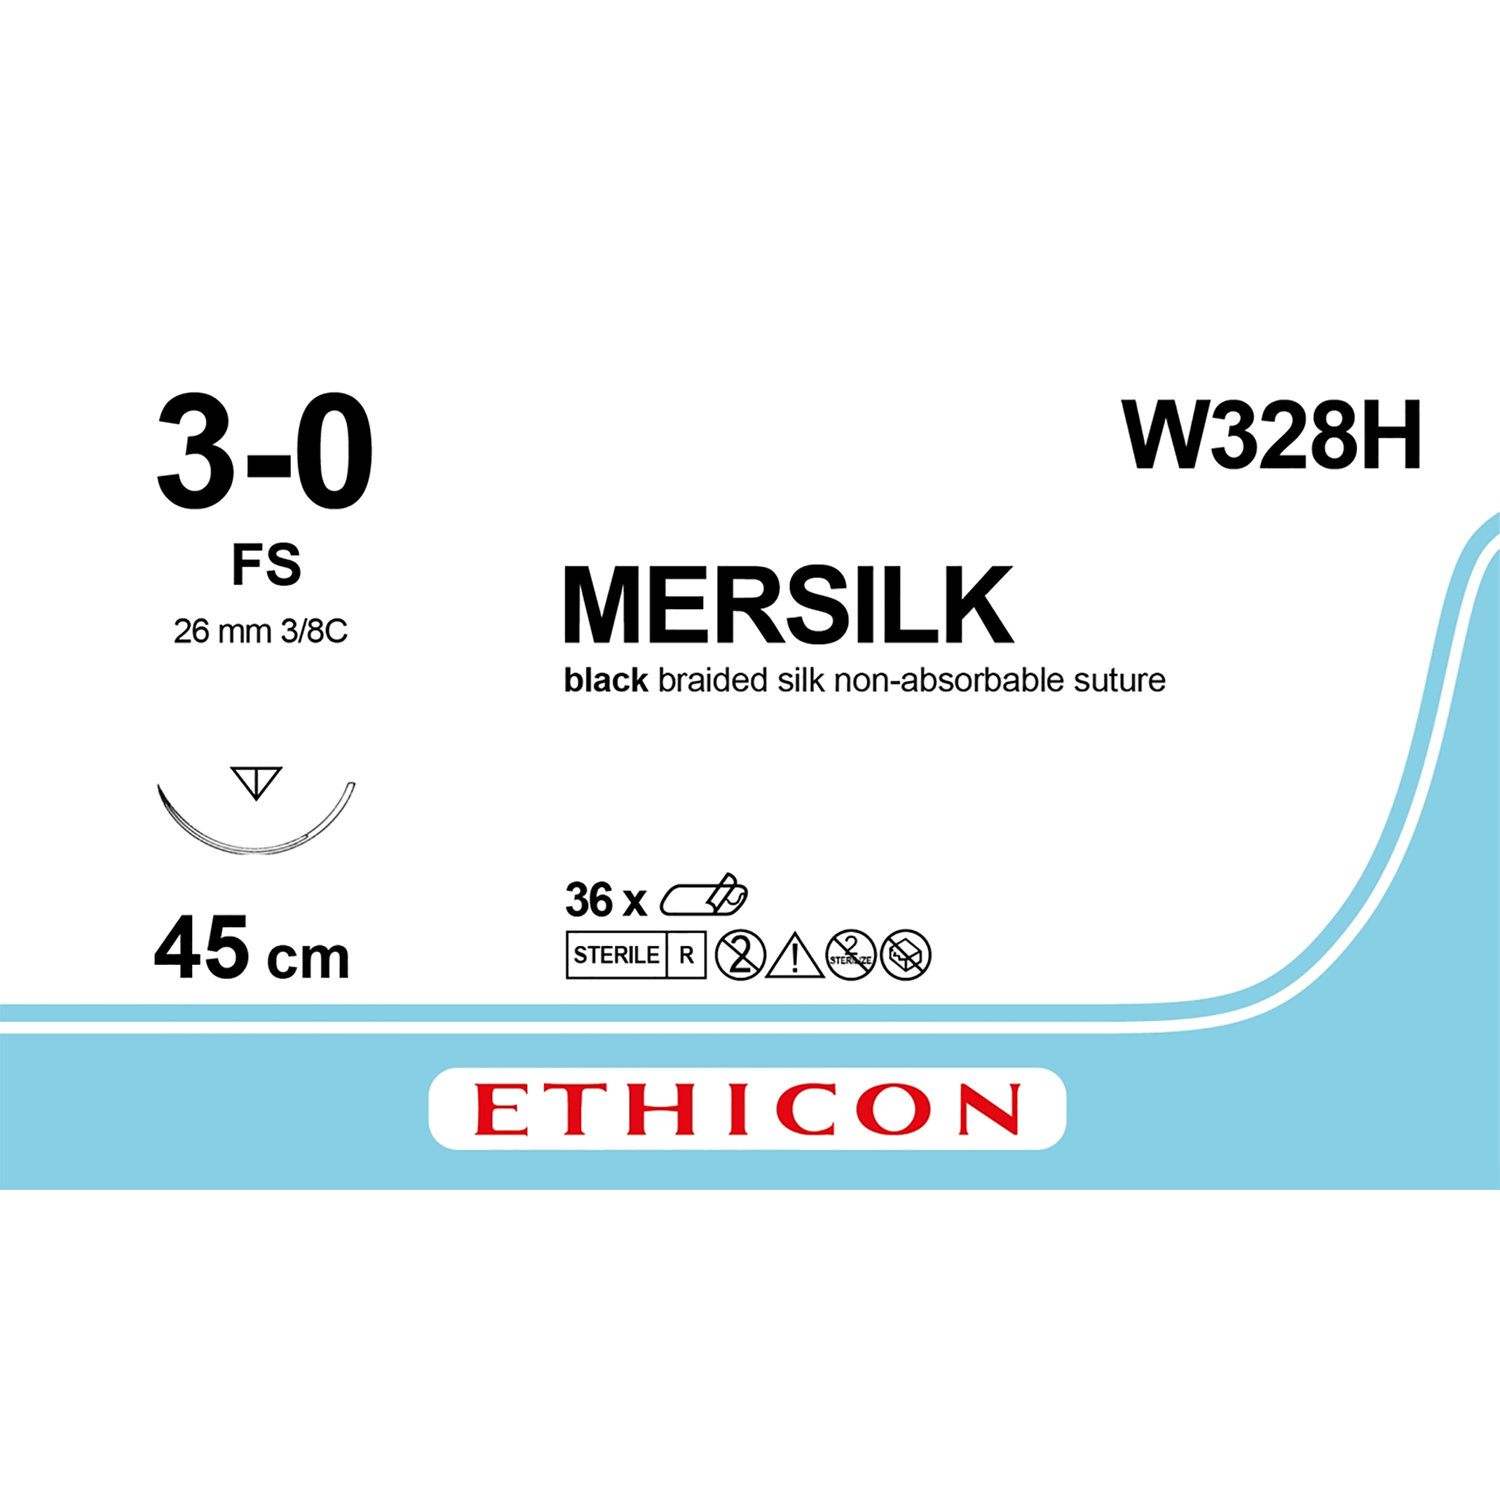 Ethicon Mersilk Suture | Non Absorbable | Black | Size: 3-0 | Length: 45cm | Needle: FS | Pack of 36